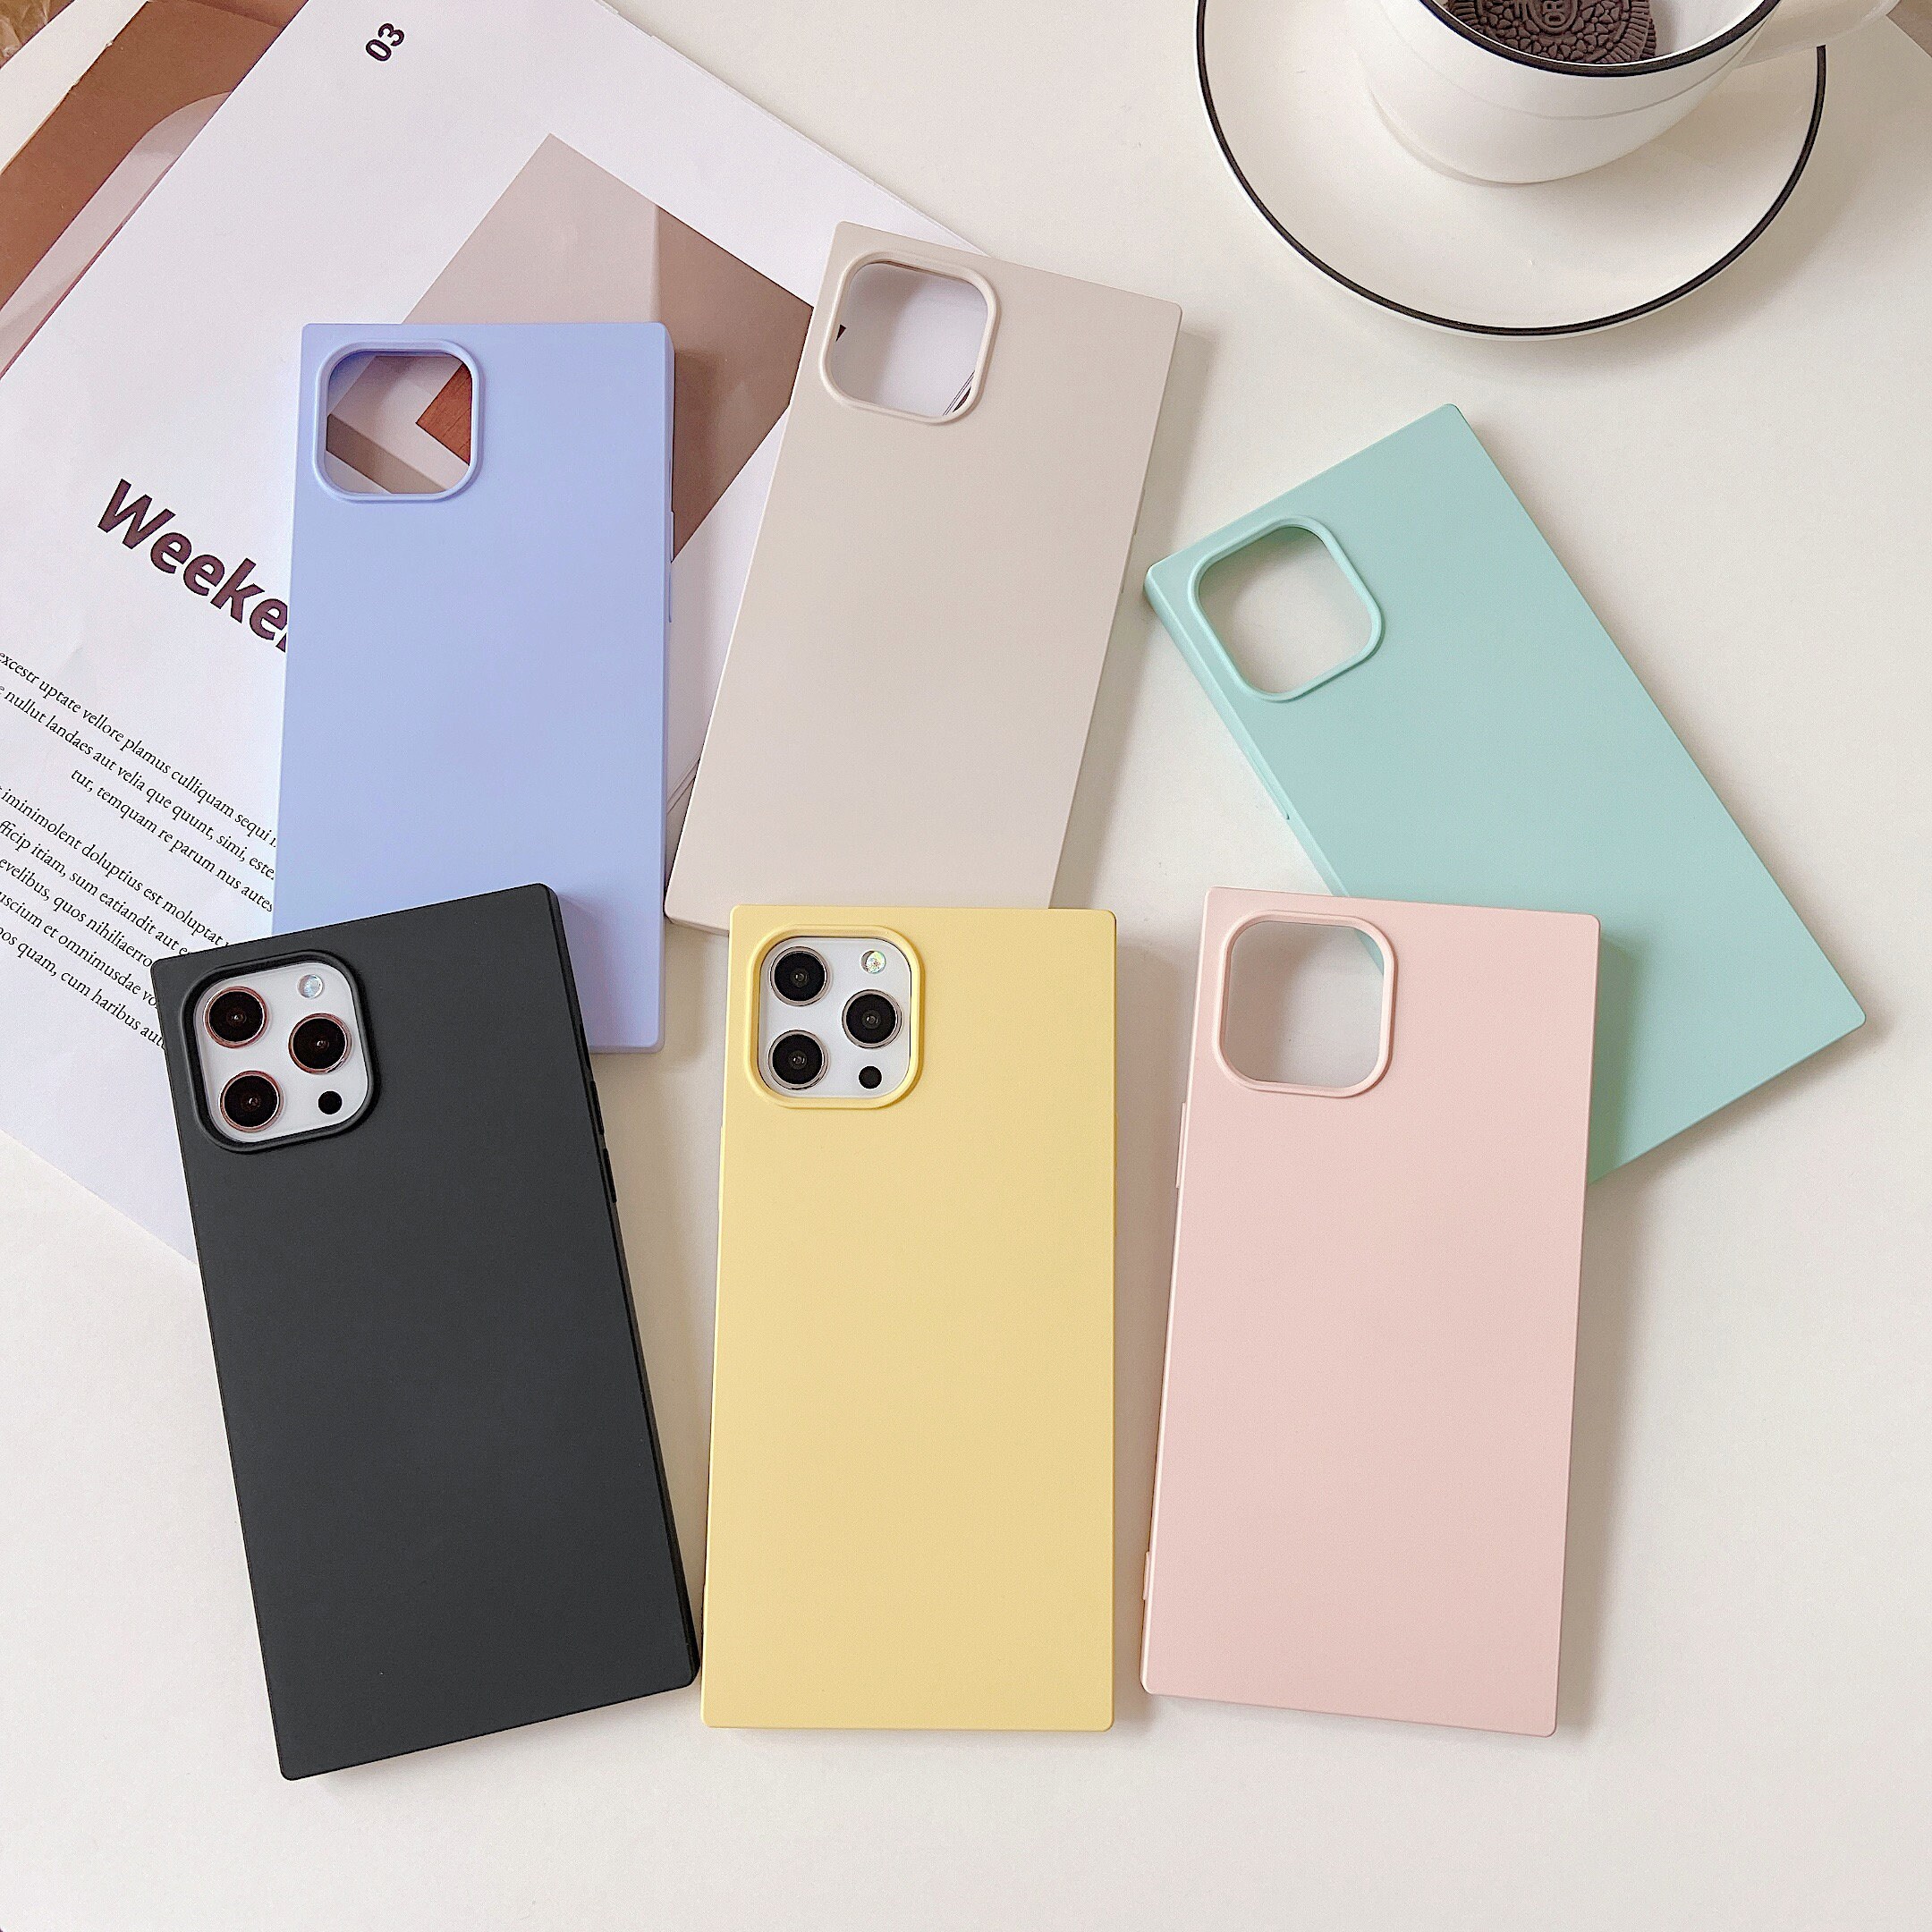 COCOMII Square Case Compatible with iPhone SE 2022/SE 2020/iPhone 8/7/6 - Slim, Glossy, Show Off The Original Beauty, Anti-Yellow, Easy to Hold